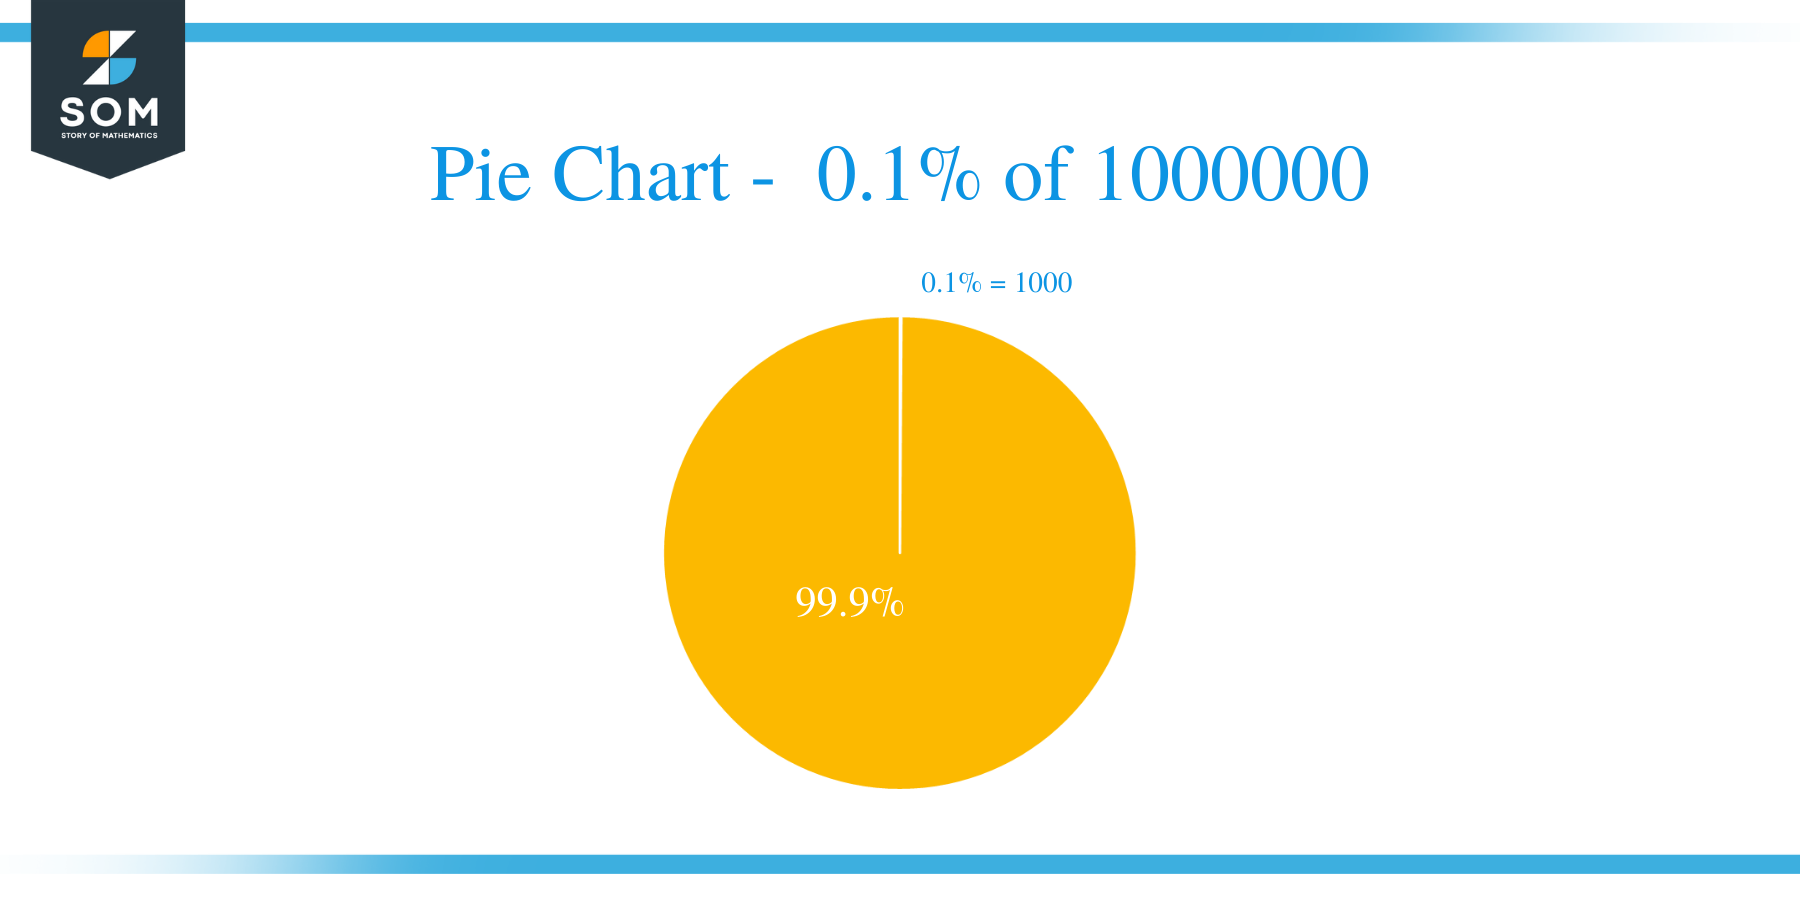 pie chart of 0.1 percent of 1000000